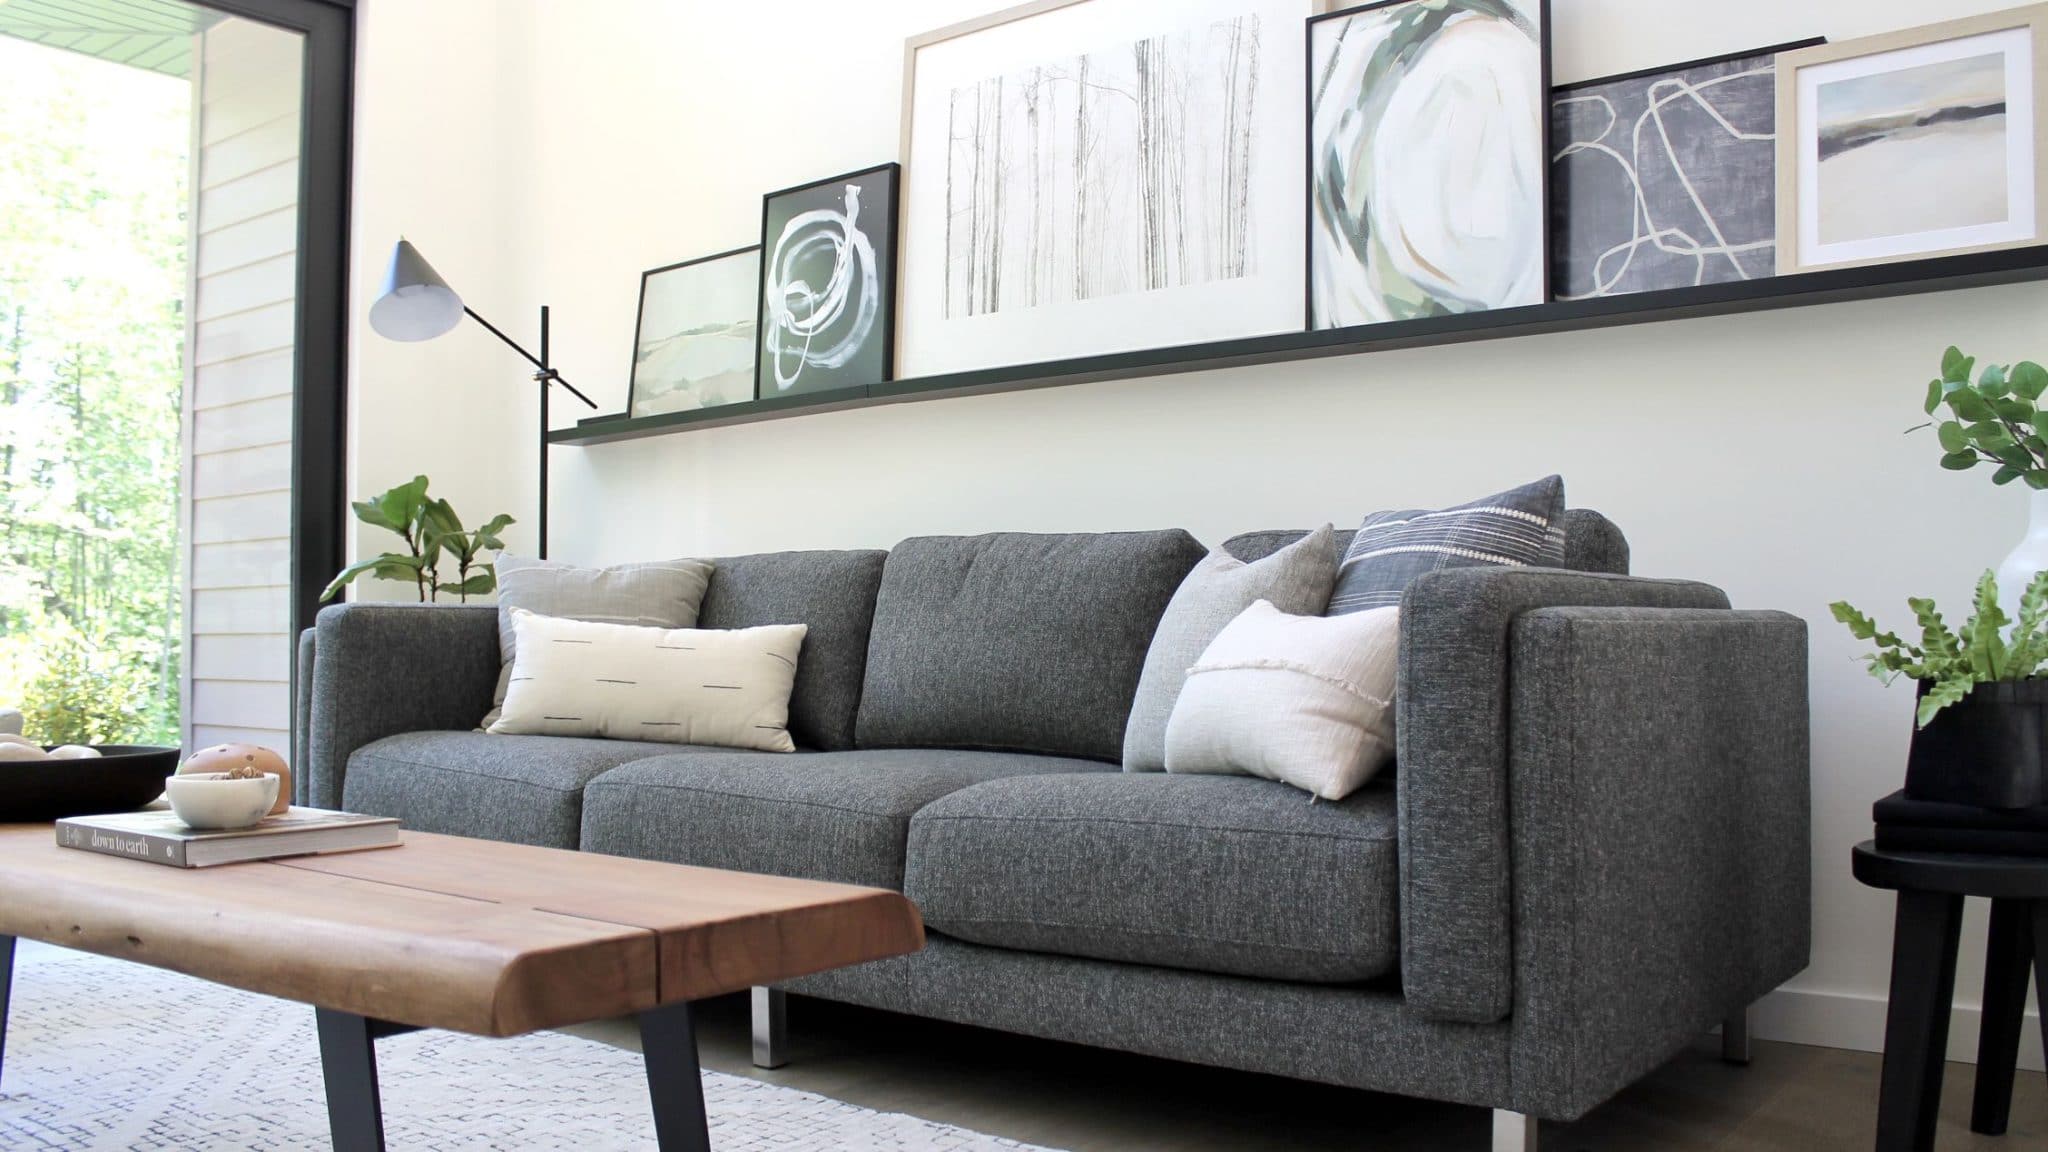 How to Choose Comfortable Sofa for Your Home